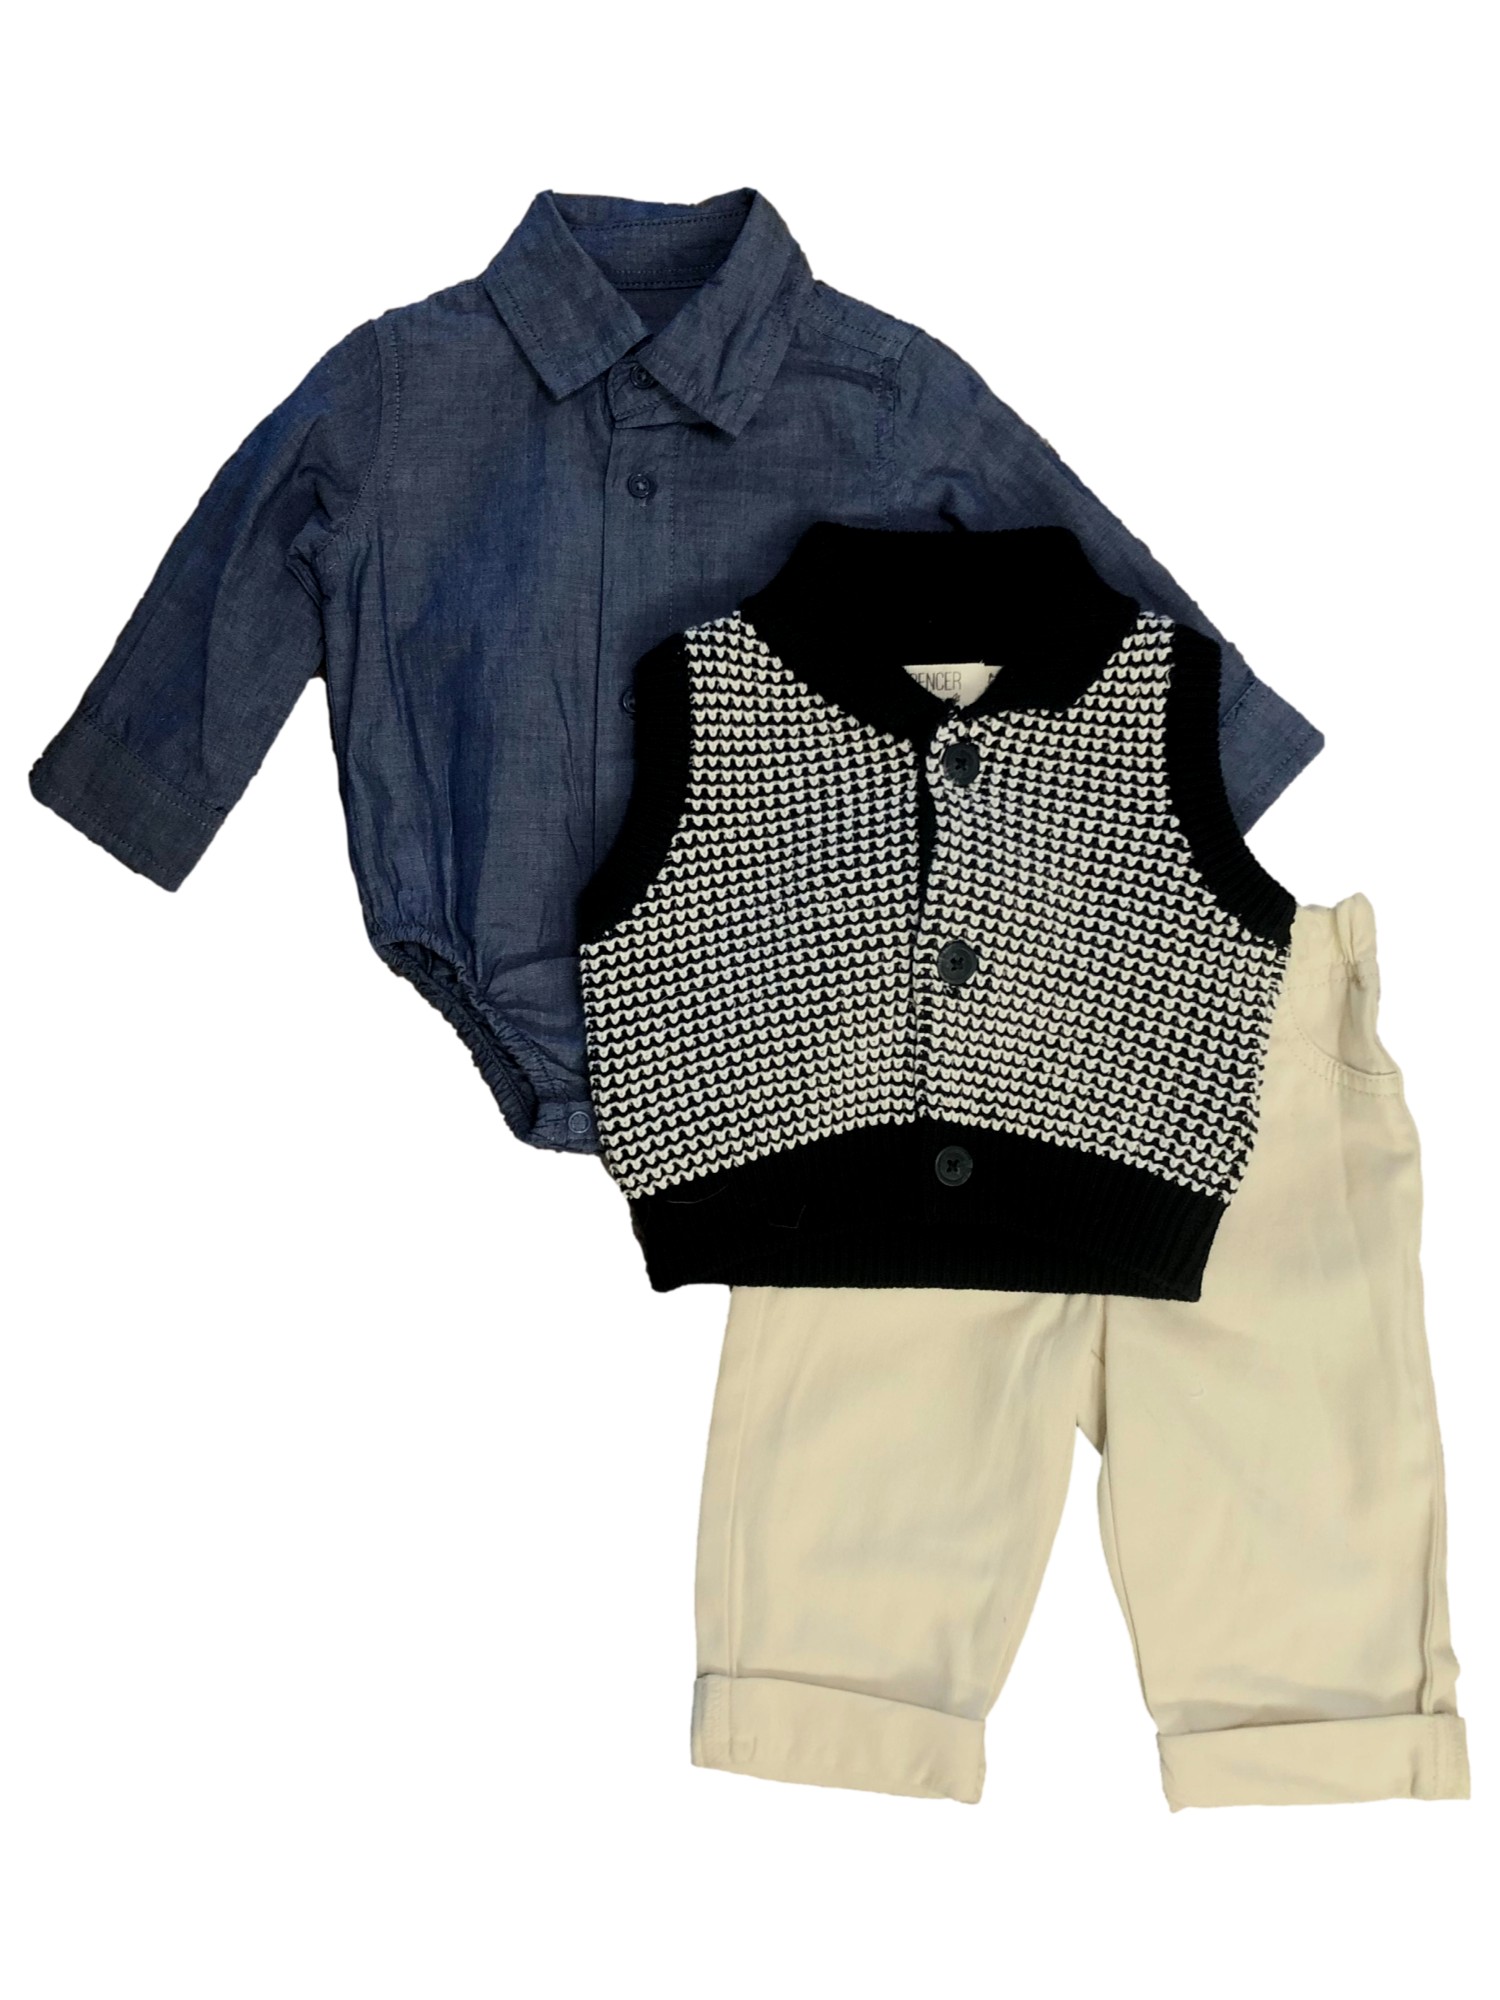 Spencer Infant Baby Boys 3 Piece Button up Bodysuit Navy Vest and Pants Outfit 0-3m